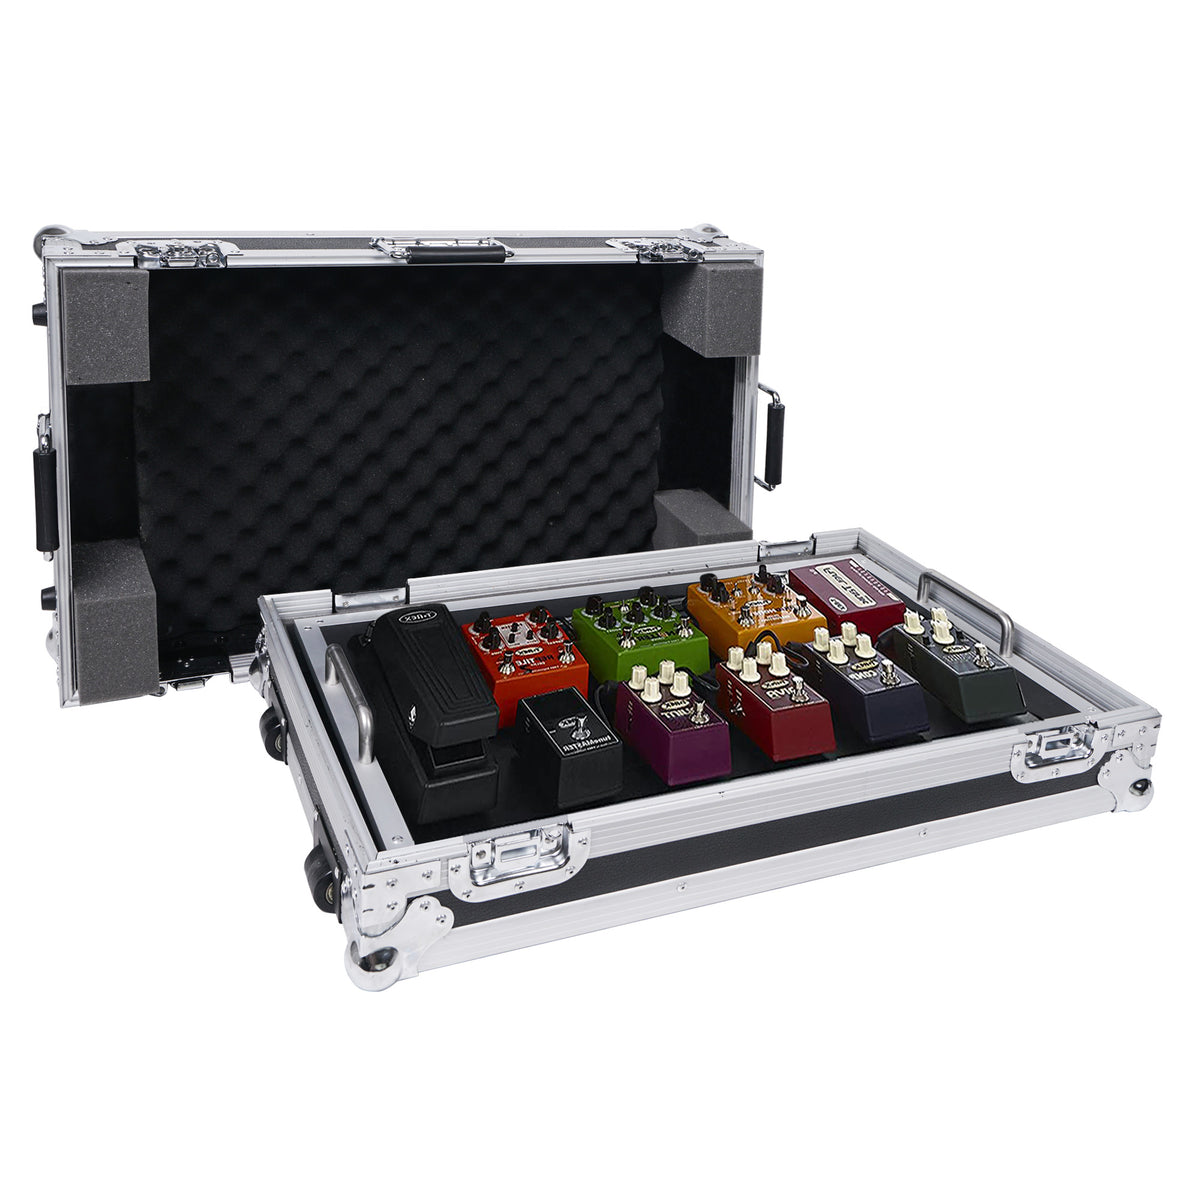 STRC-PDLW-R | REFURBISHED: Pedal Board ATA Road Case with Wheels 